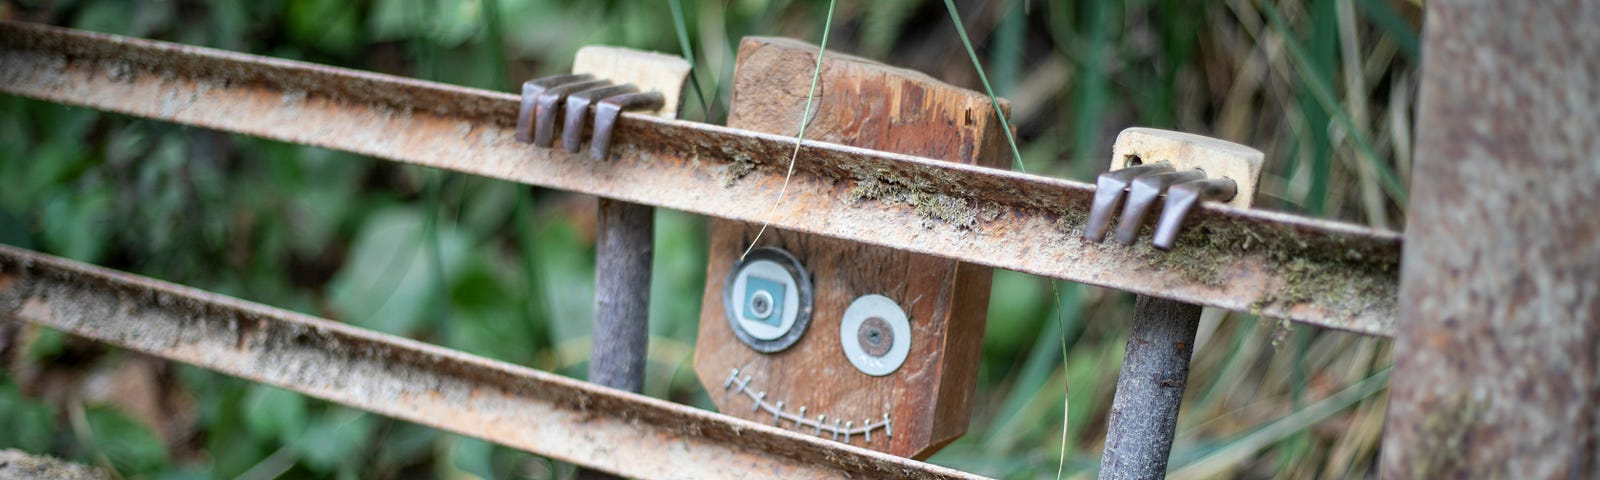 The image shows a small wooden figure resembling a robot with a square head, large round eyes made from washers, and a stitched mouth. The figure is positioned behind rusted metal bars on the side of a bridge or walkway, peering through. The background includes blurred greenery.